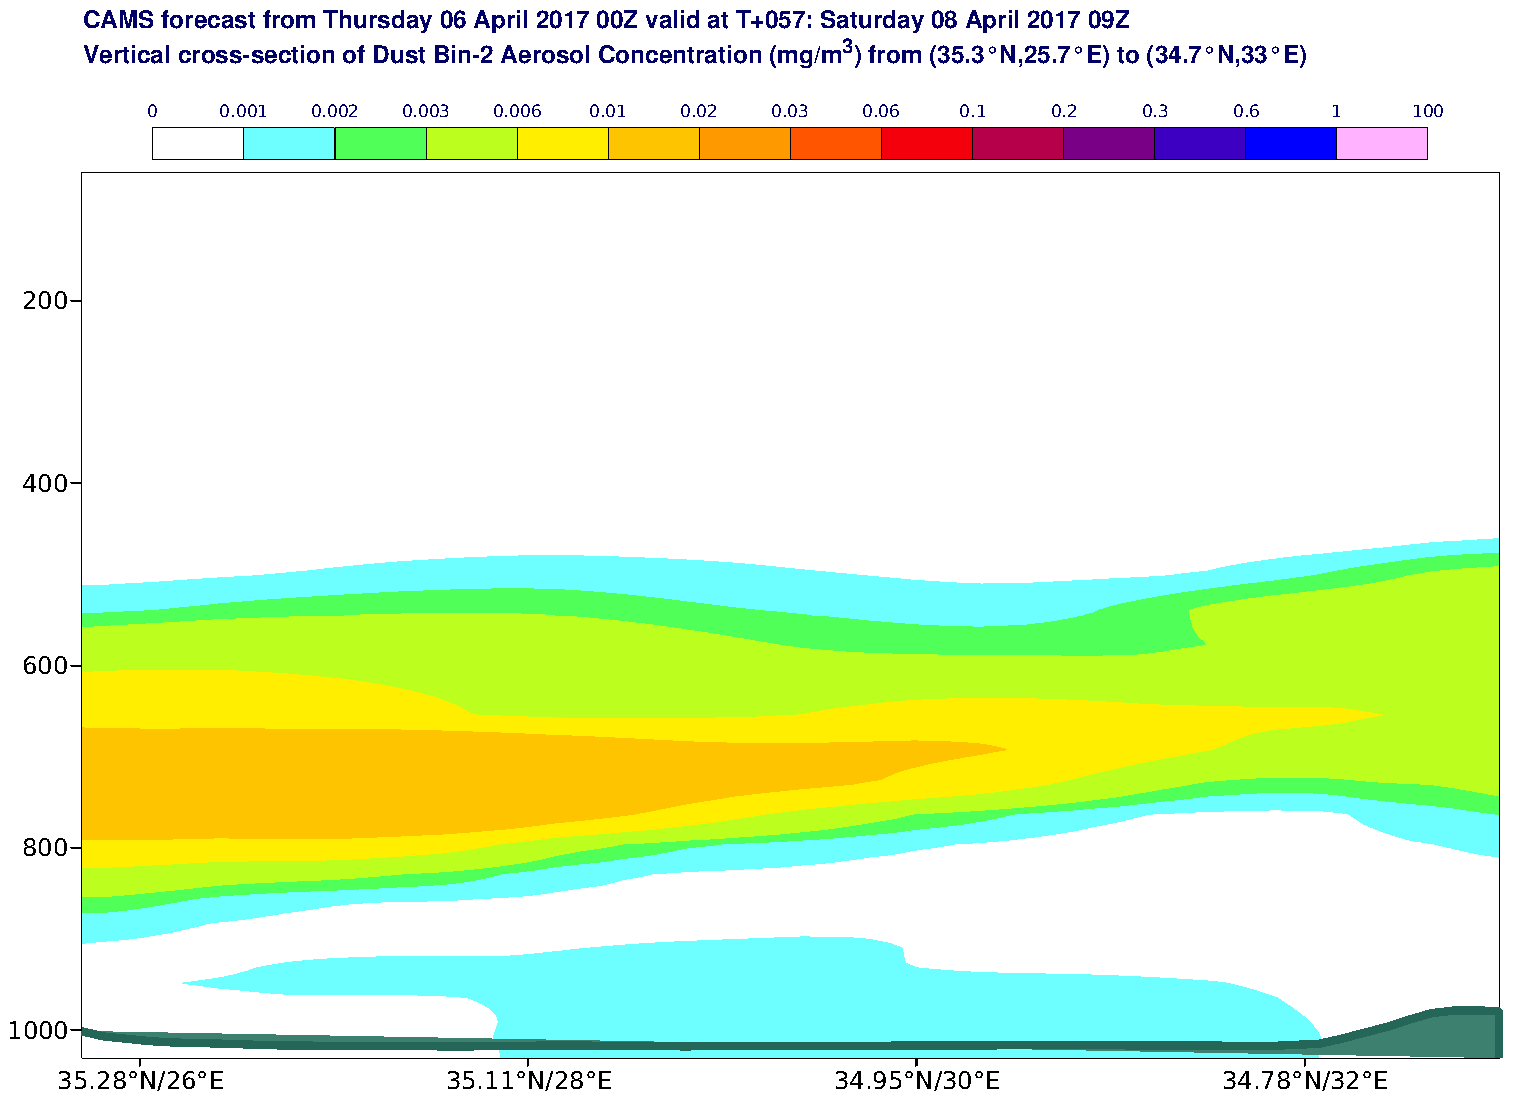 Vertical cross-section of Dust Bin-2 Aerosol Concentration (mg/m3) valid at T57 - 2017-04-08 09:00